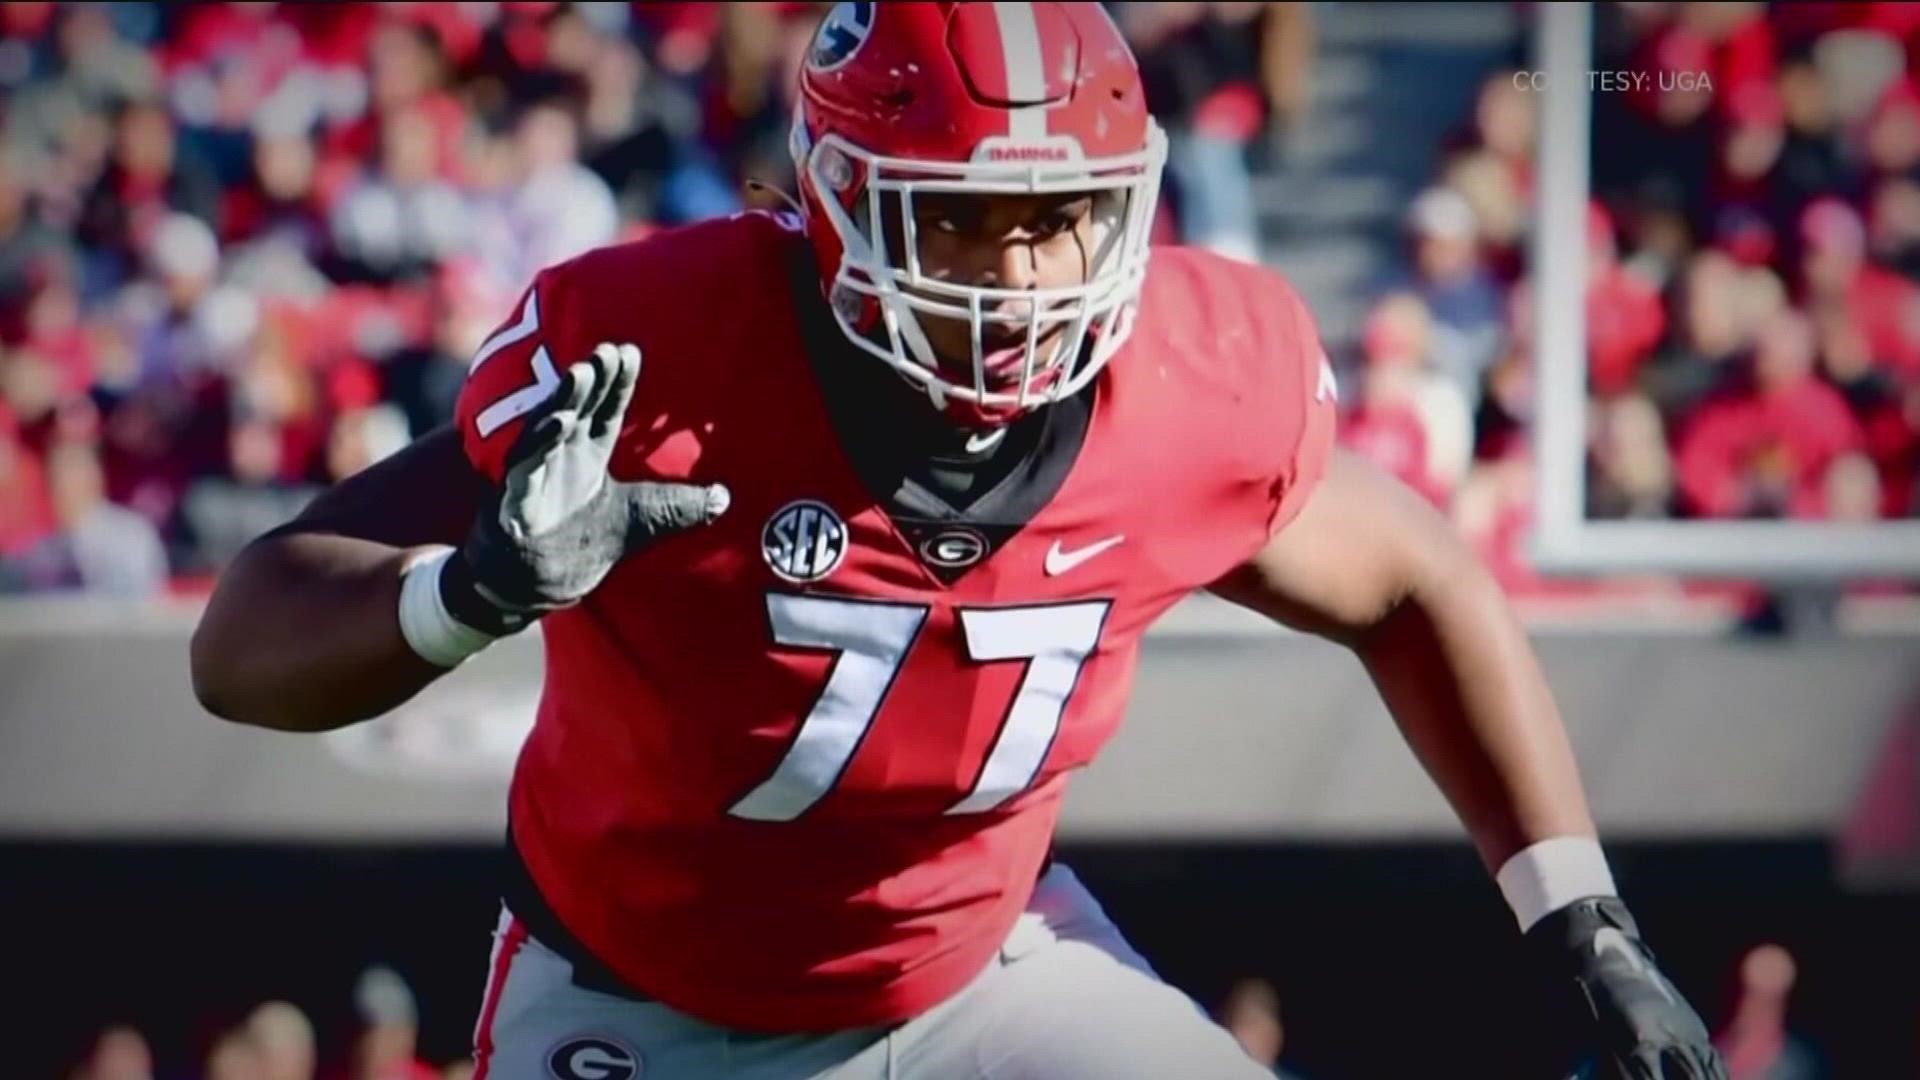 Former UGA player Warren McClendon will wear jersey No. 77 in honor of Devin Willock during the Reese’s Senior Bowl on Feb. 4.